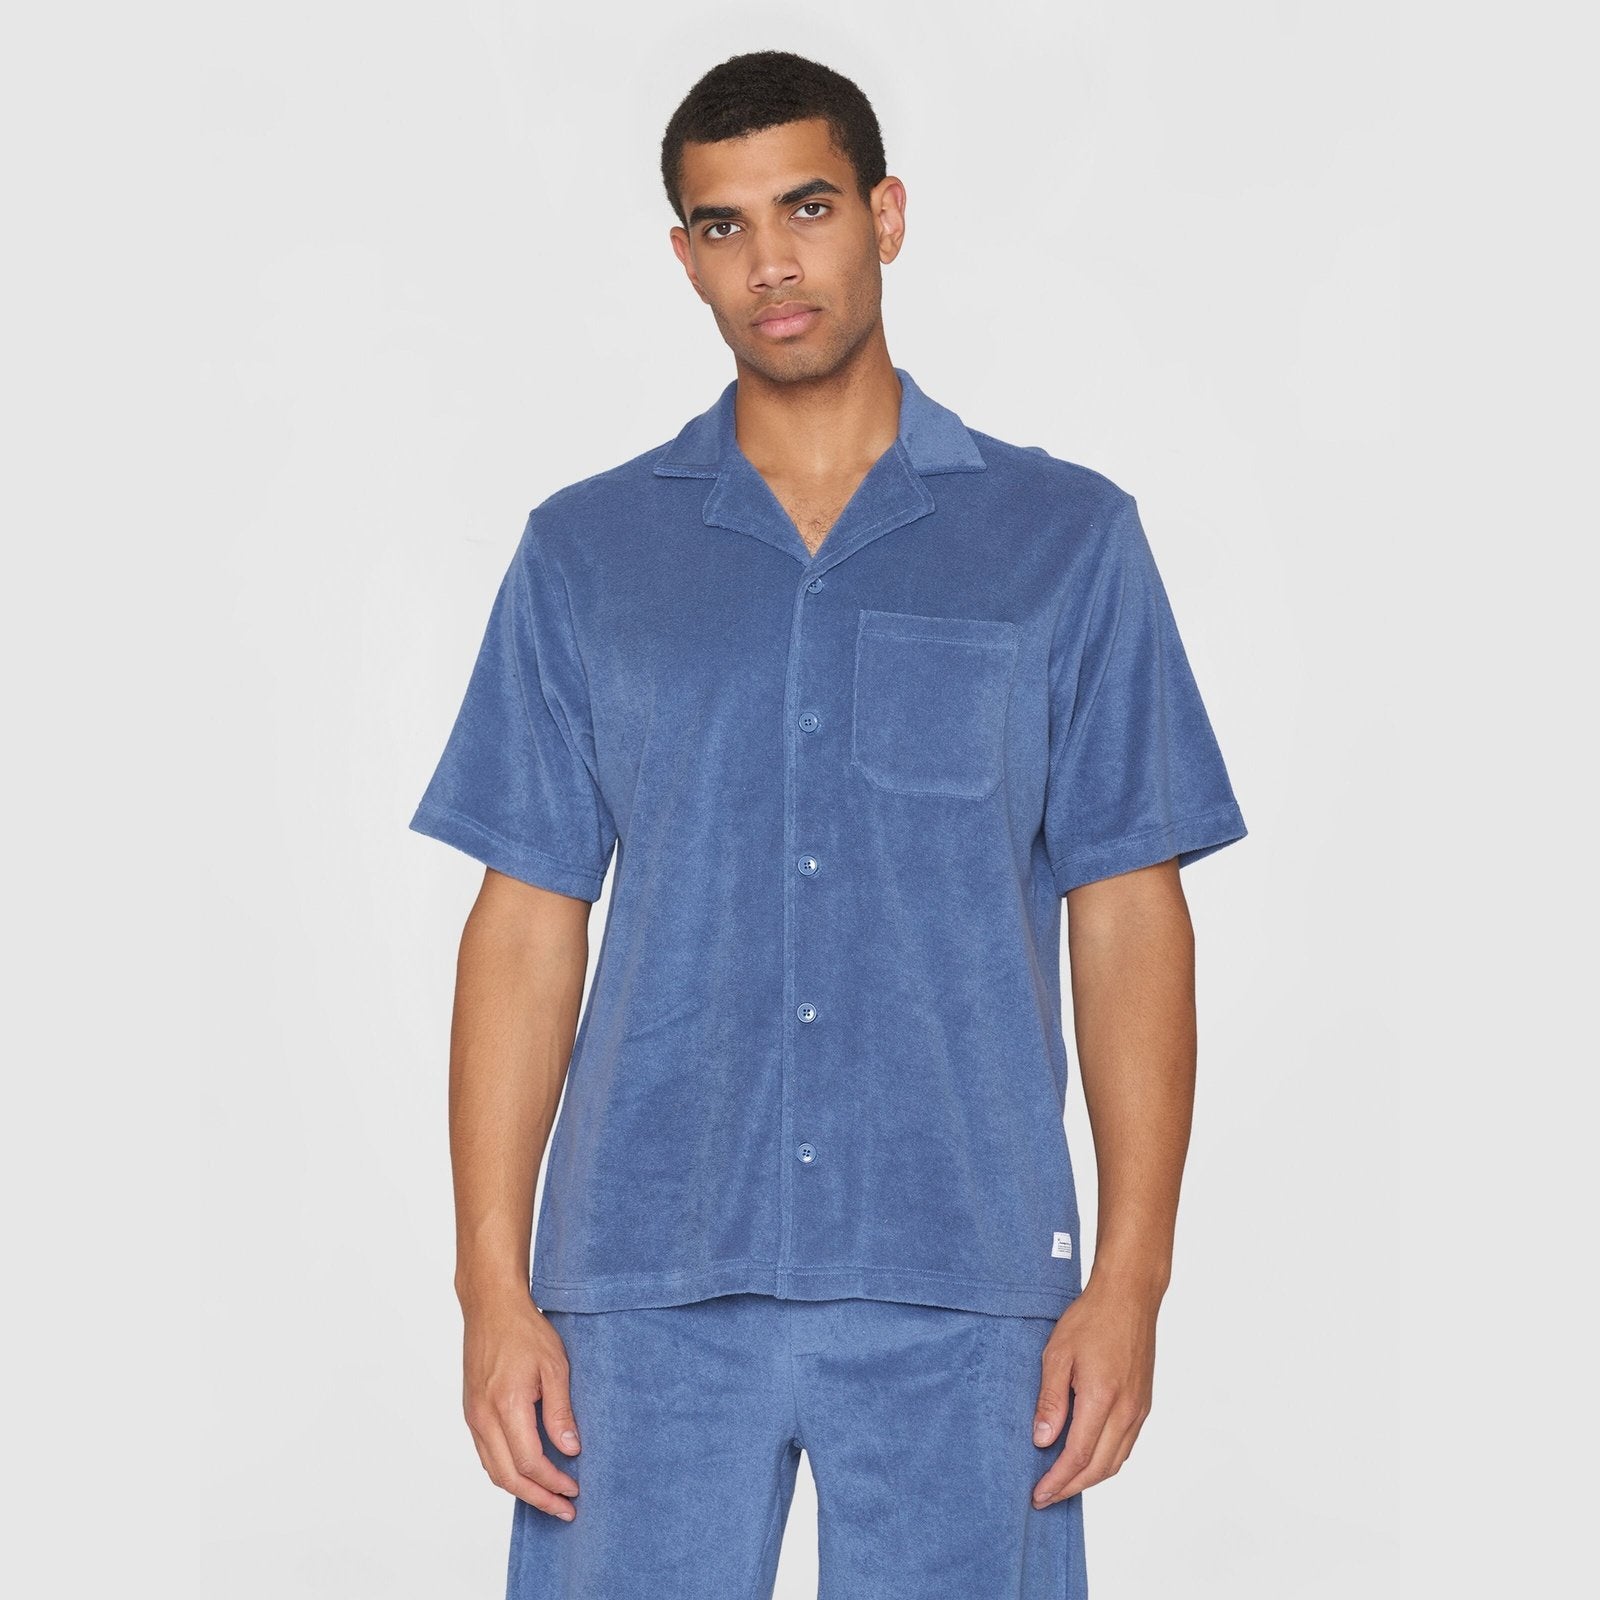 Knowledge Cotton Apparel M Terry Loose Fit Short Sleeve Shirt Moonligt Blue